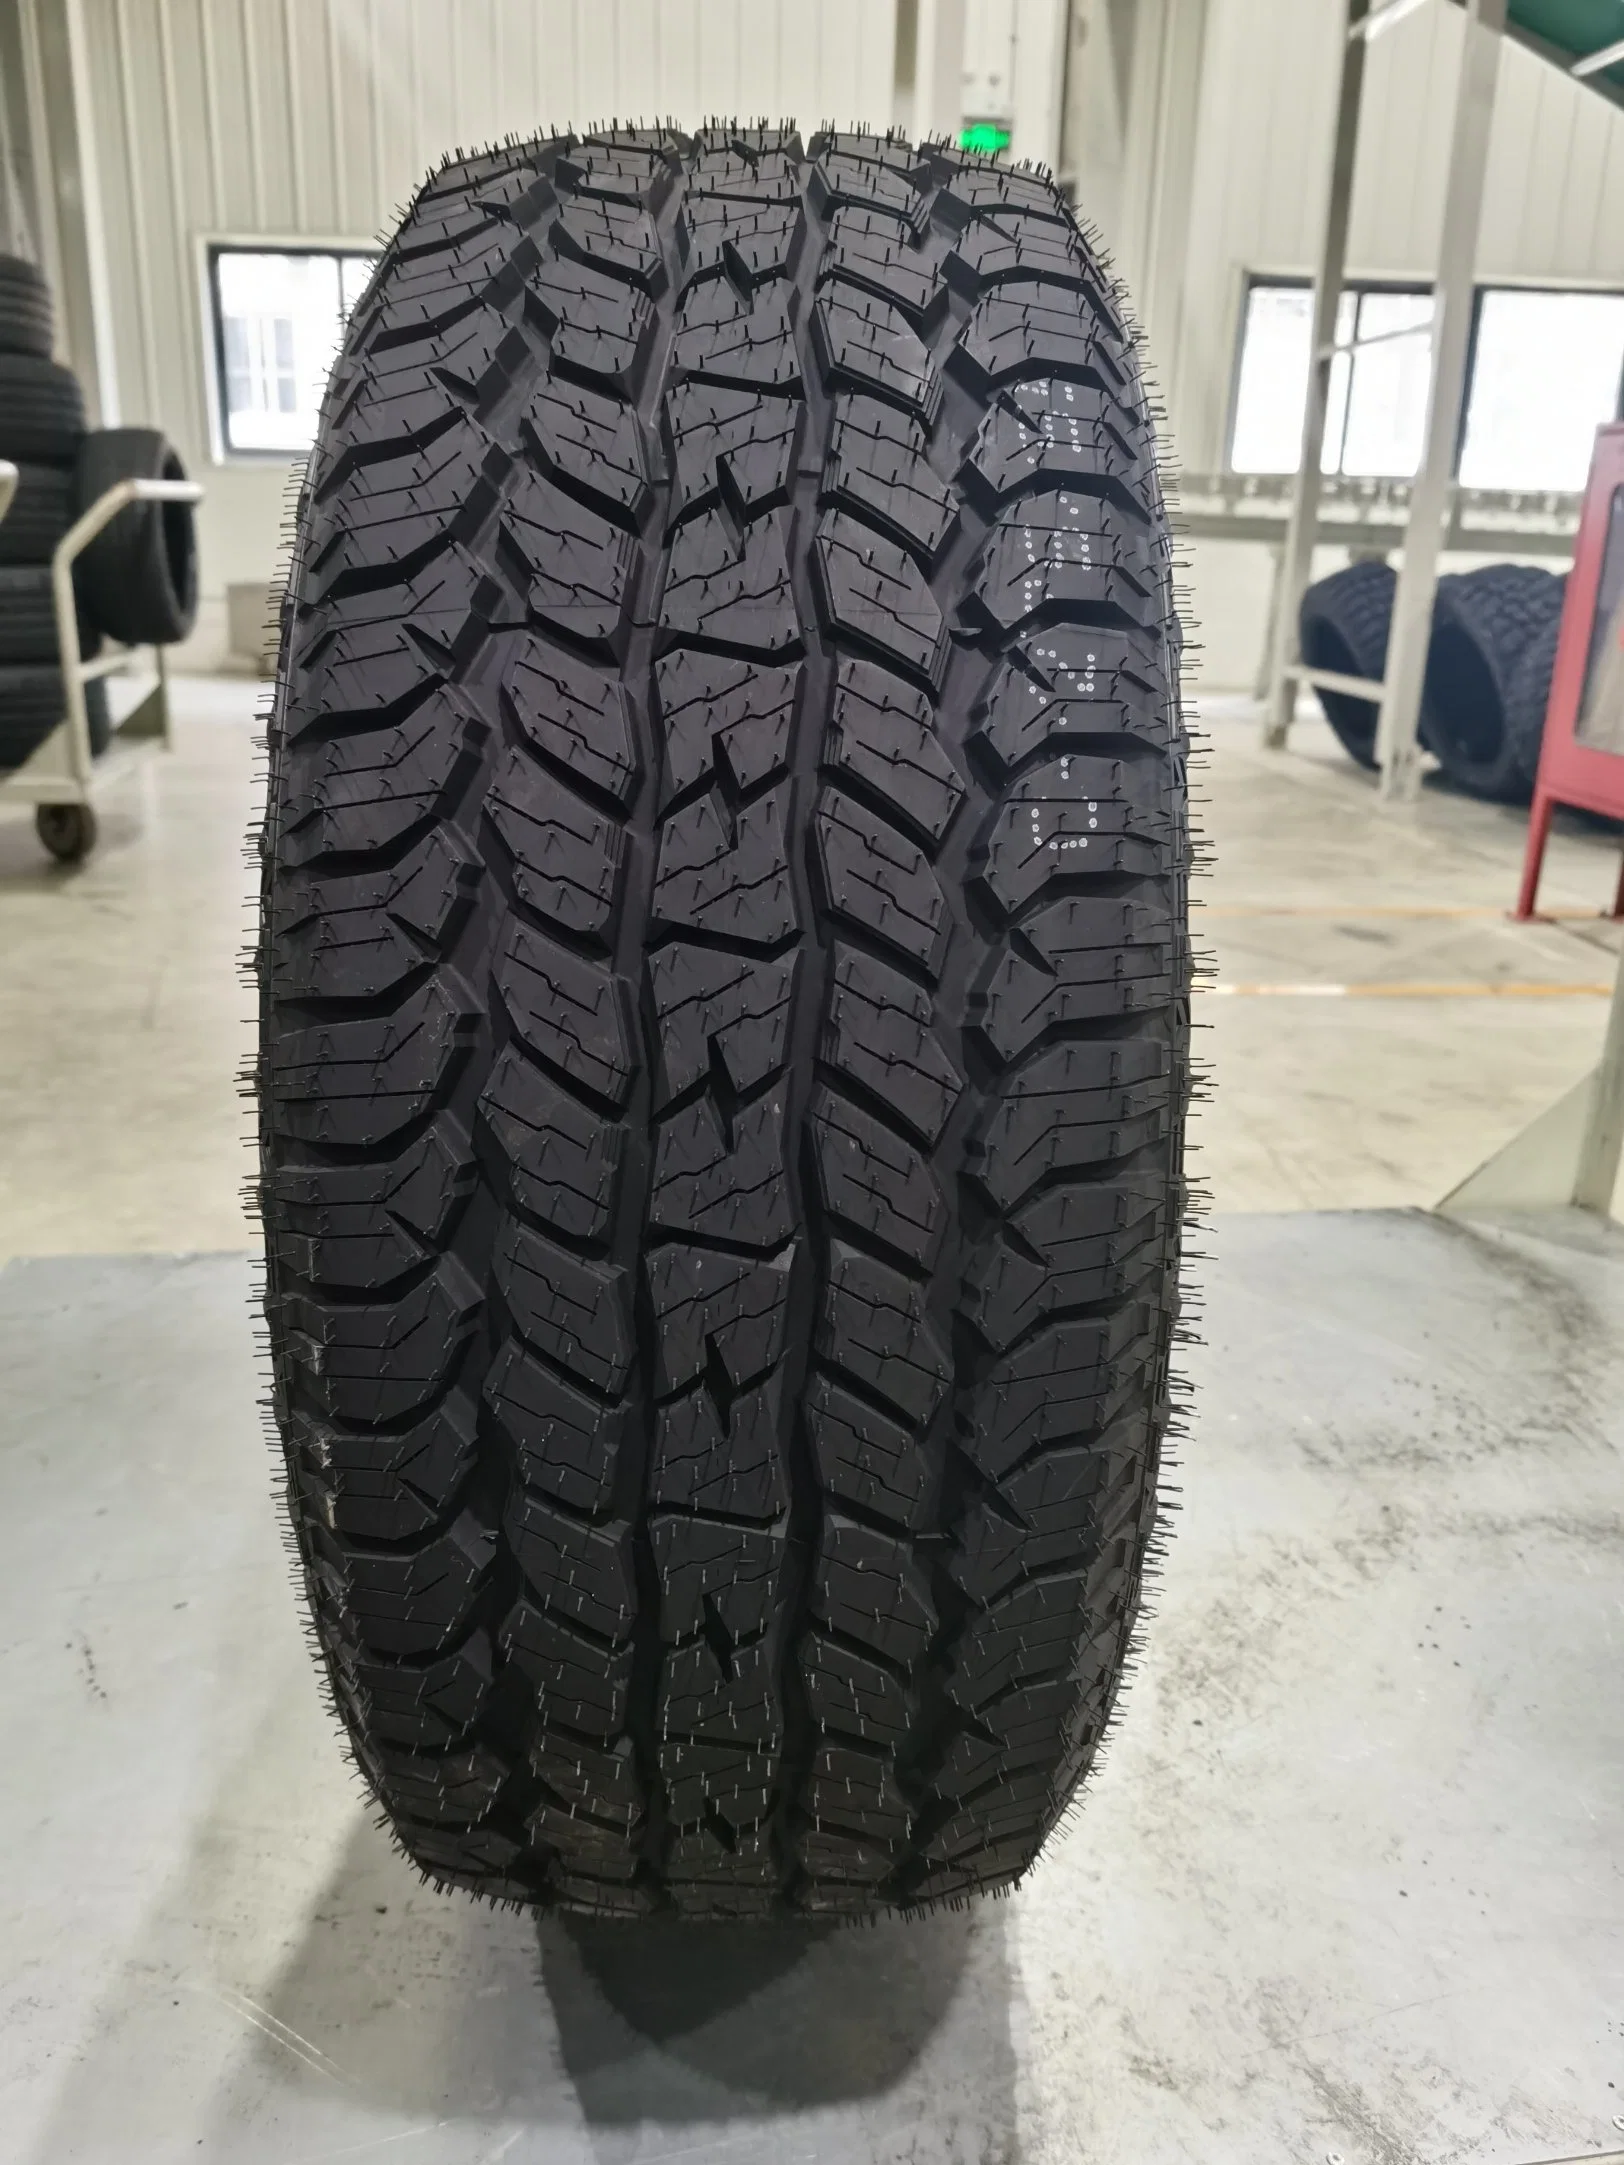 Miletrip brand LT245/75R16 10ply TP55 Radial A/T tire with WSW SUV tire Tubeless 4x4 Passenger car radial factory supply cheap prices LTR OFF-ROAD P car tires